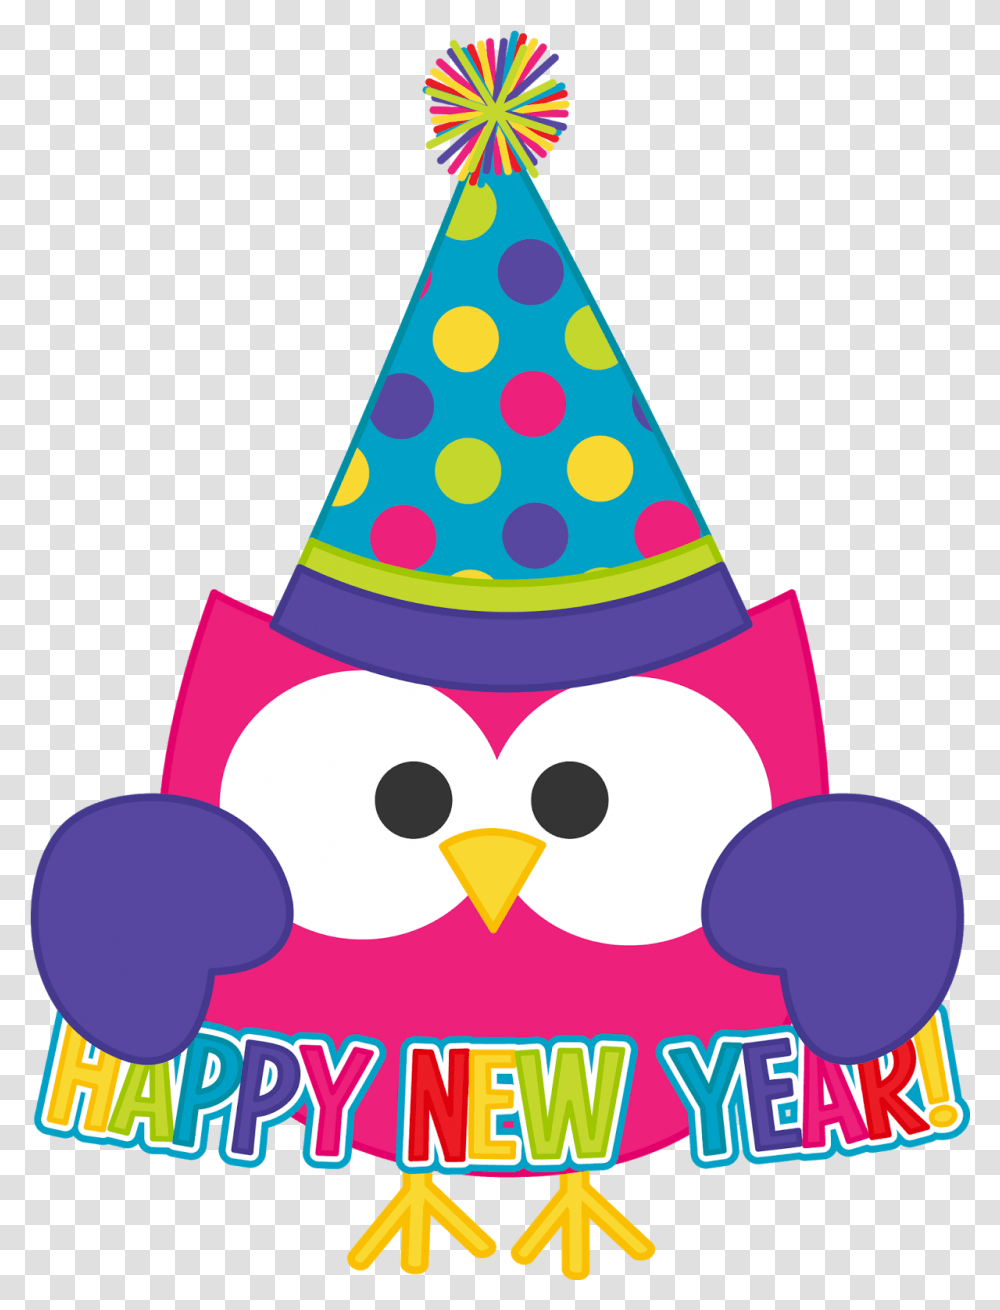 Clip Art Cute New Years Eve Clip Art, Clothing, Apparel, Party Hat, Birthday Cake Transparent Png